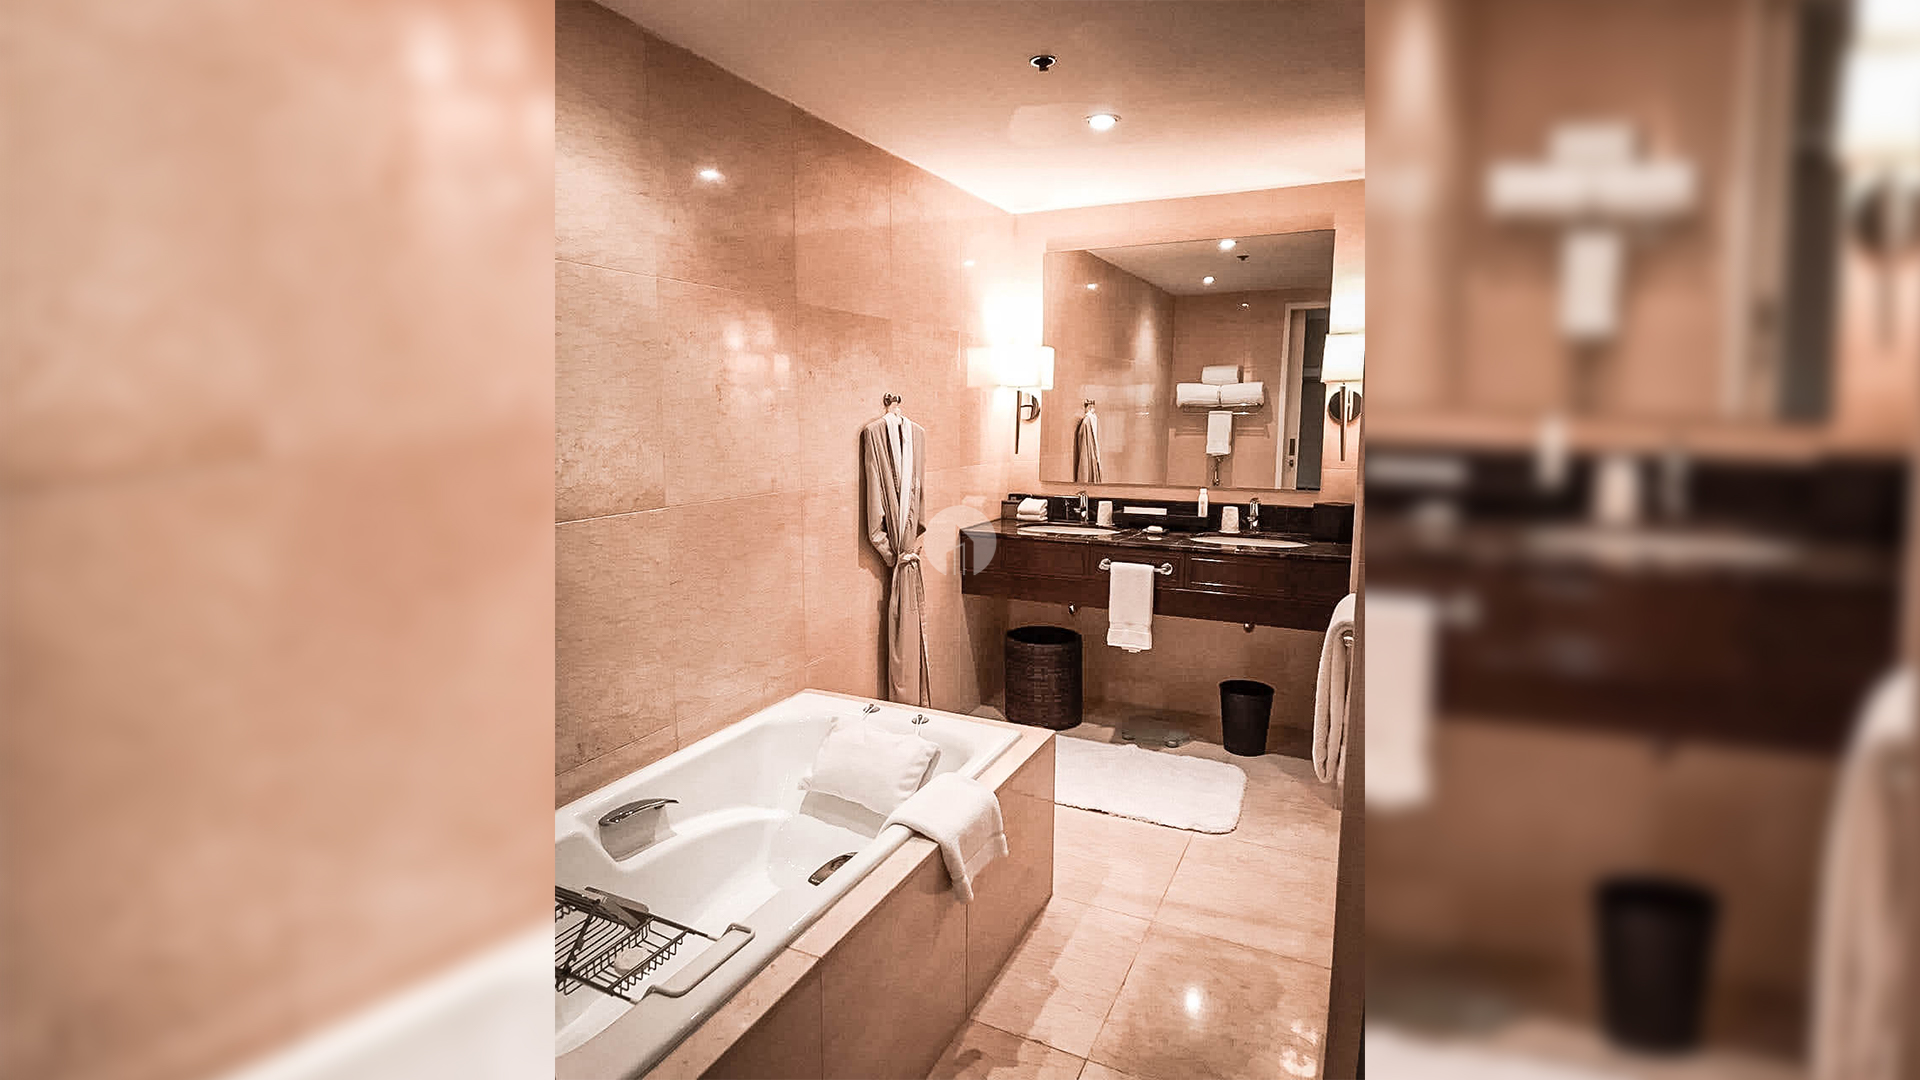 Condo Unit in Raffles Drive Makati by Golden Sphere Realty